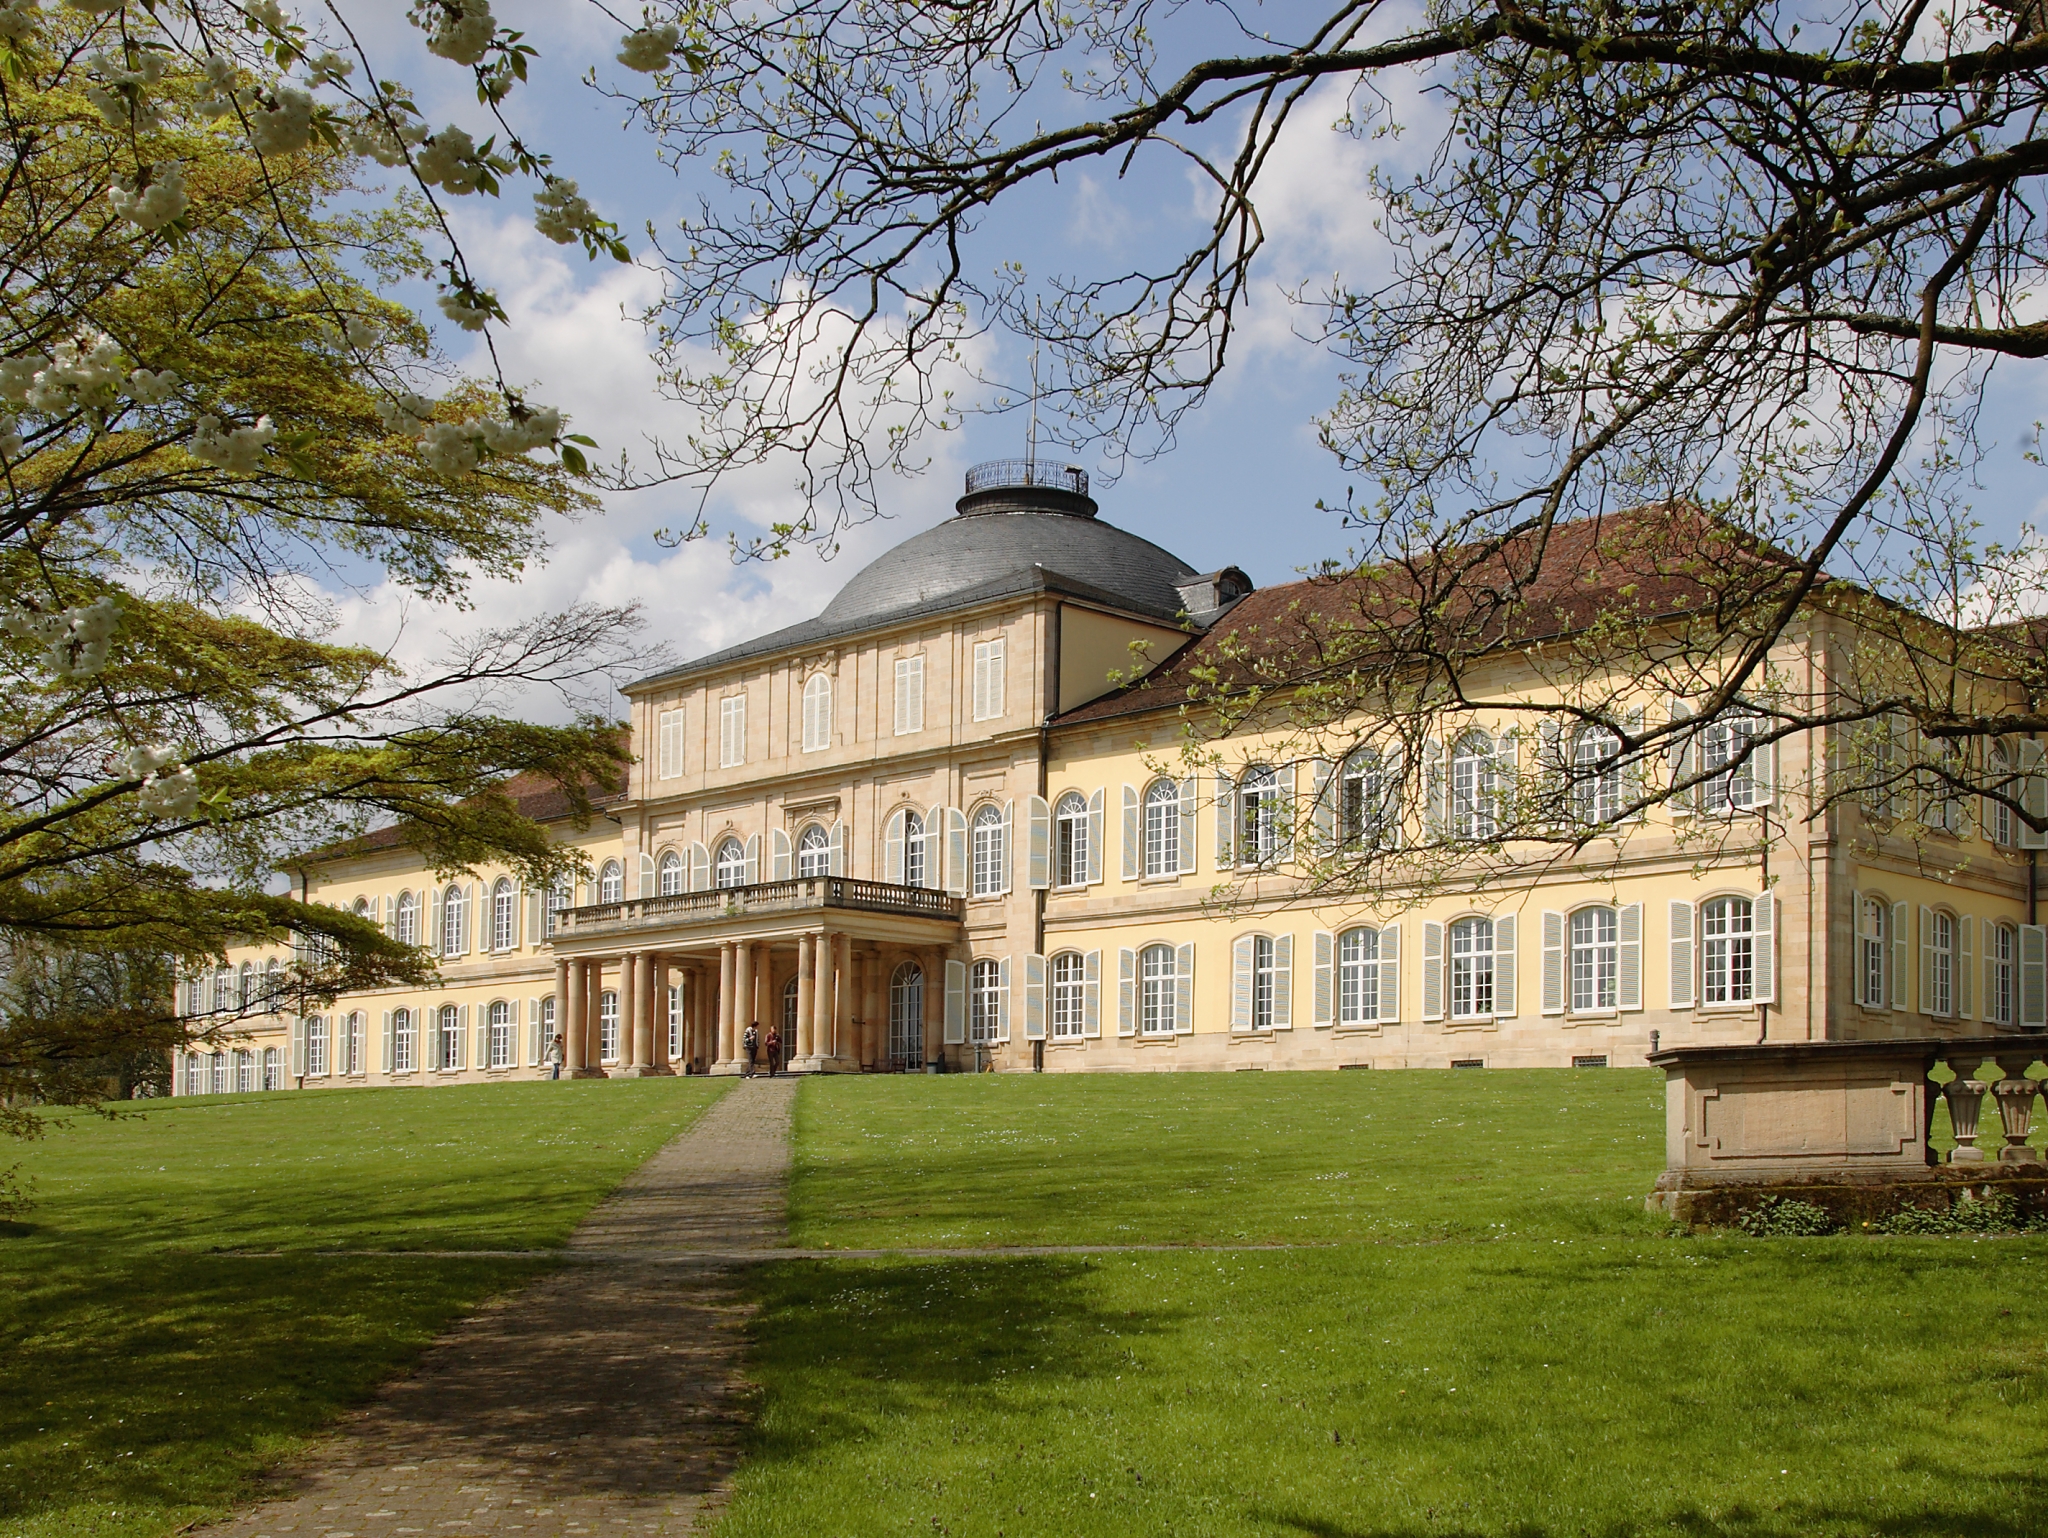 The historic Hohenheim Castle - a sand-coloured pompous building with balcony and windows. It is located in a green area. Blue sky and clouds in the background.